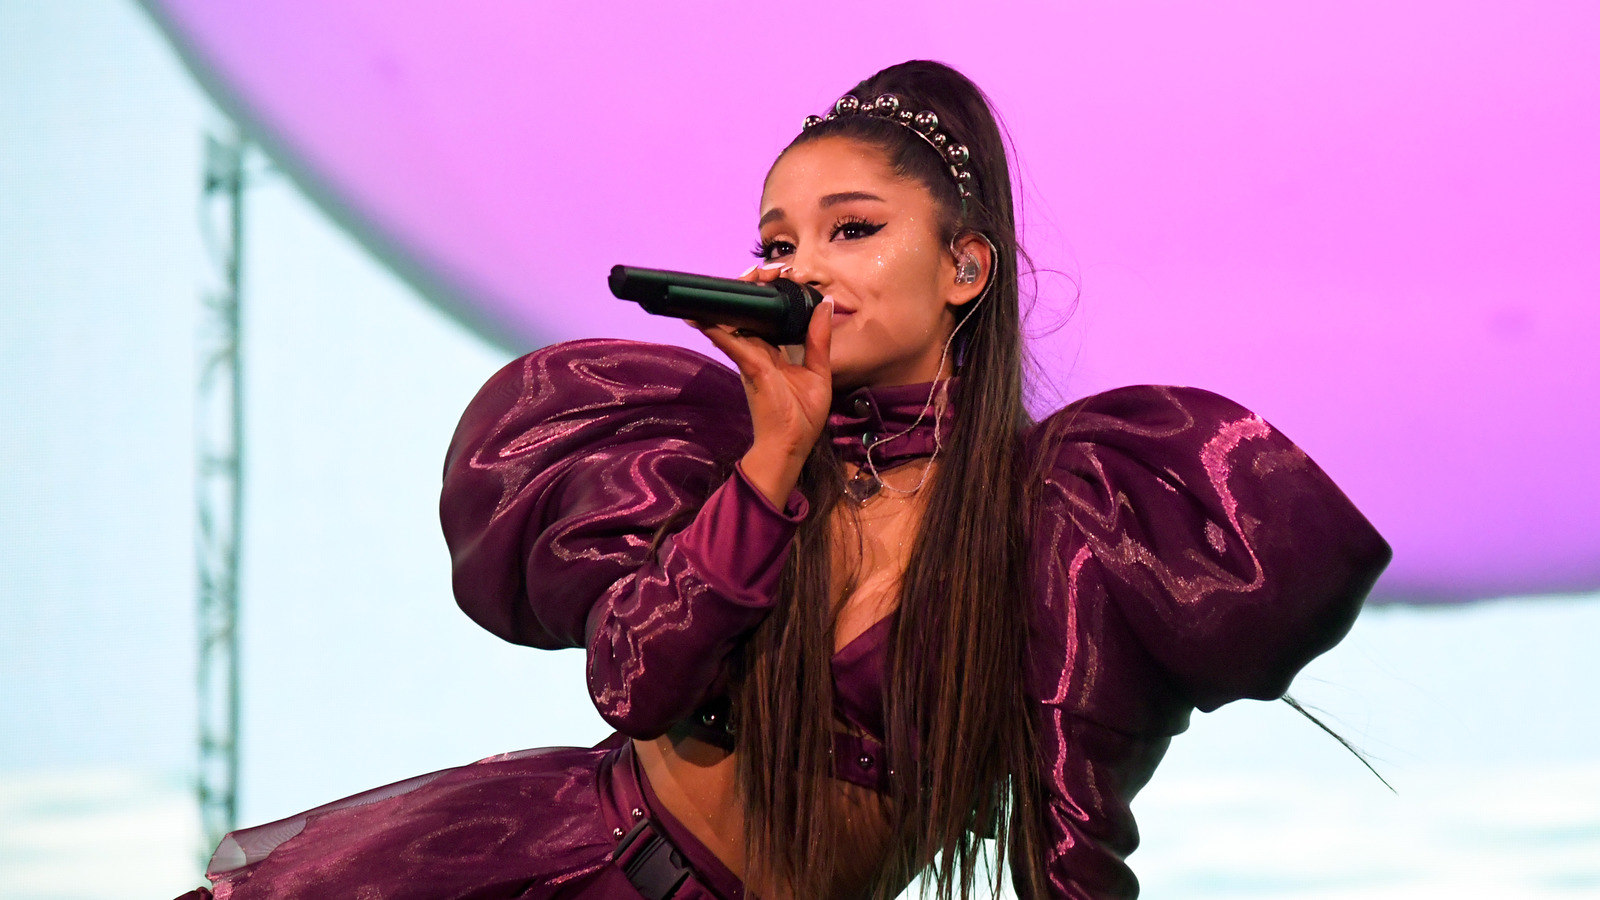 Dangerous Woman': How Ariana Grande Shed Her Pop Persona